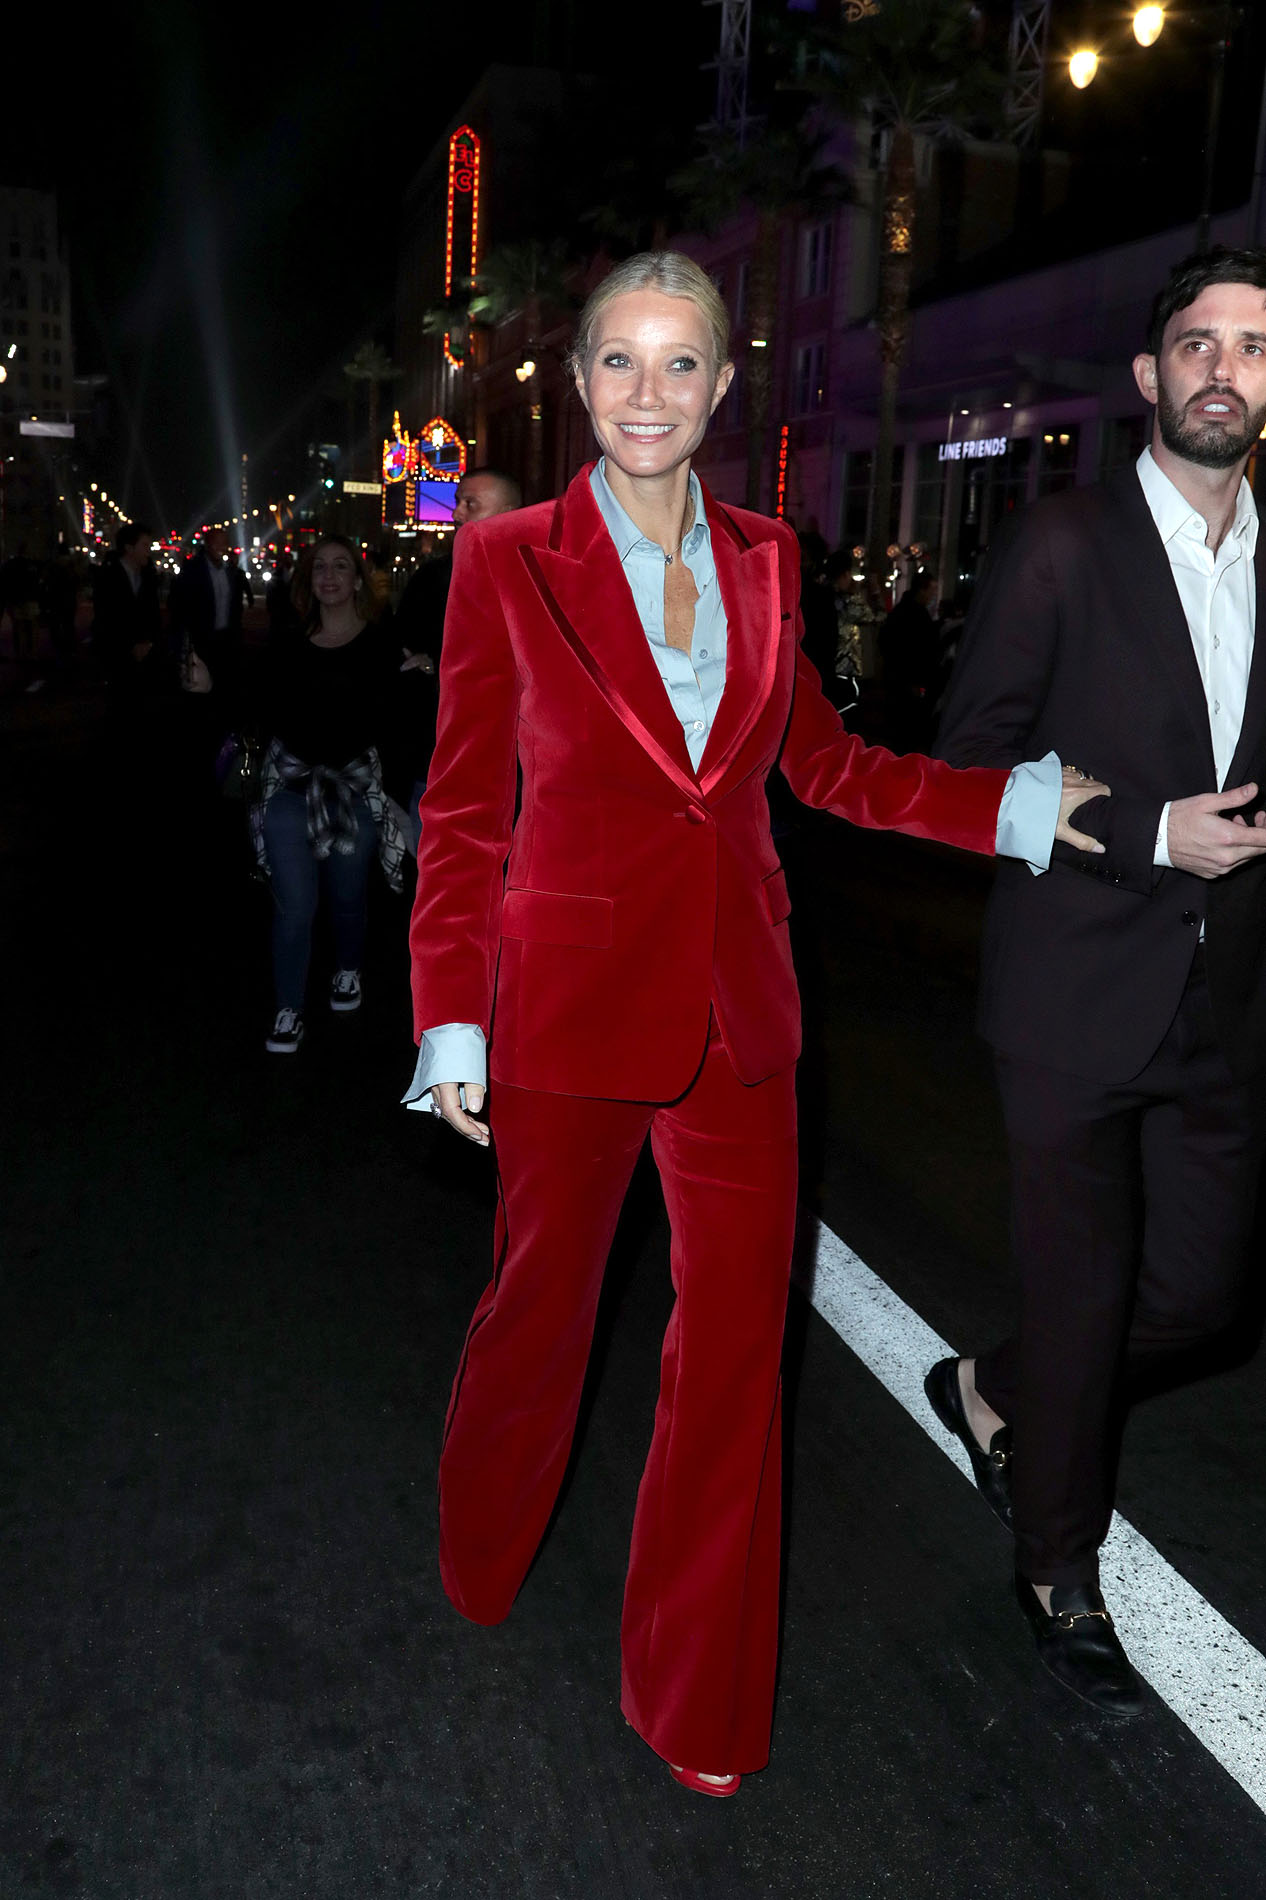 Gwyneth Paltrow Wore Her Iconic Tom Ford Gucci Suit to the Gucci Love Show!  - Go Fug Yourself